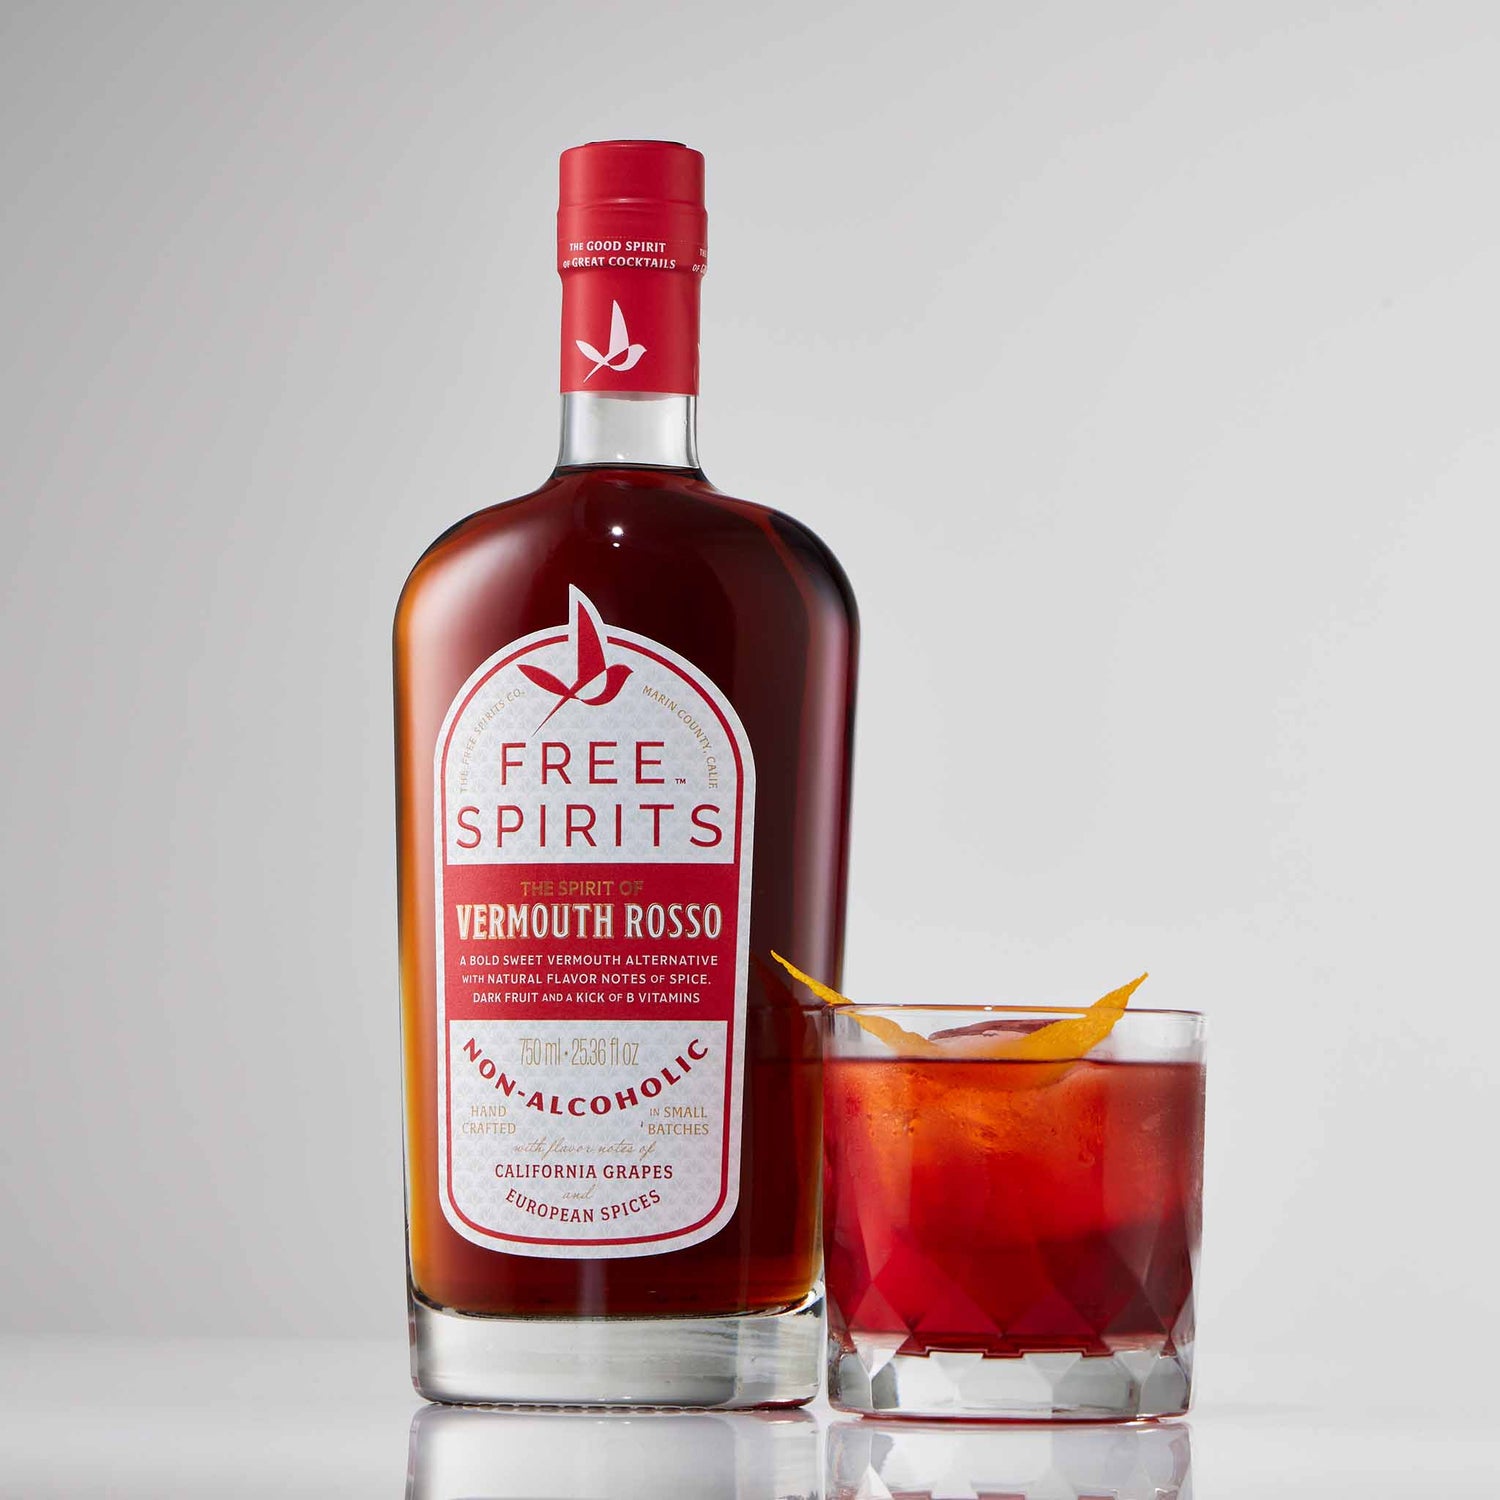 Beverages - The Spirit Of Vermouth Rosso